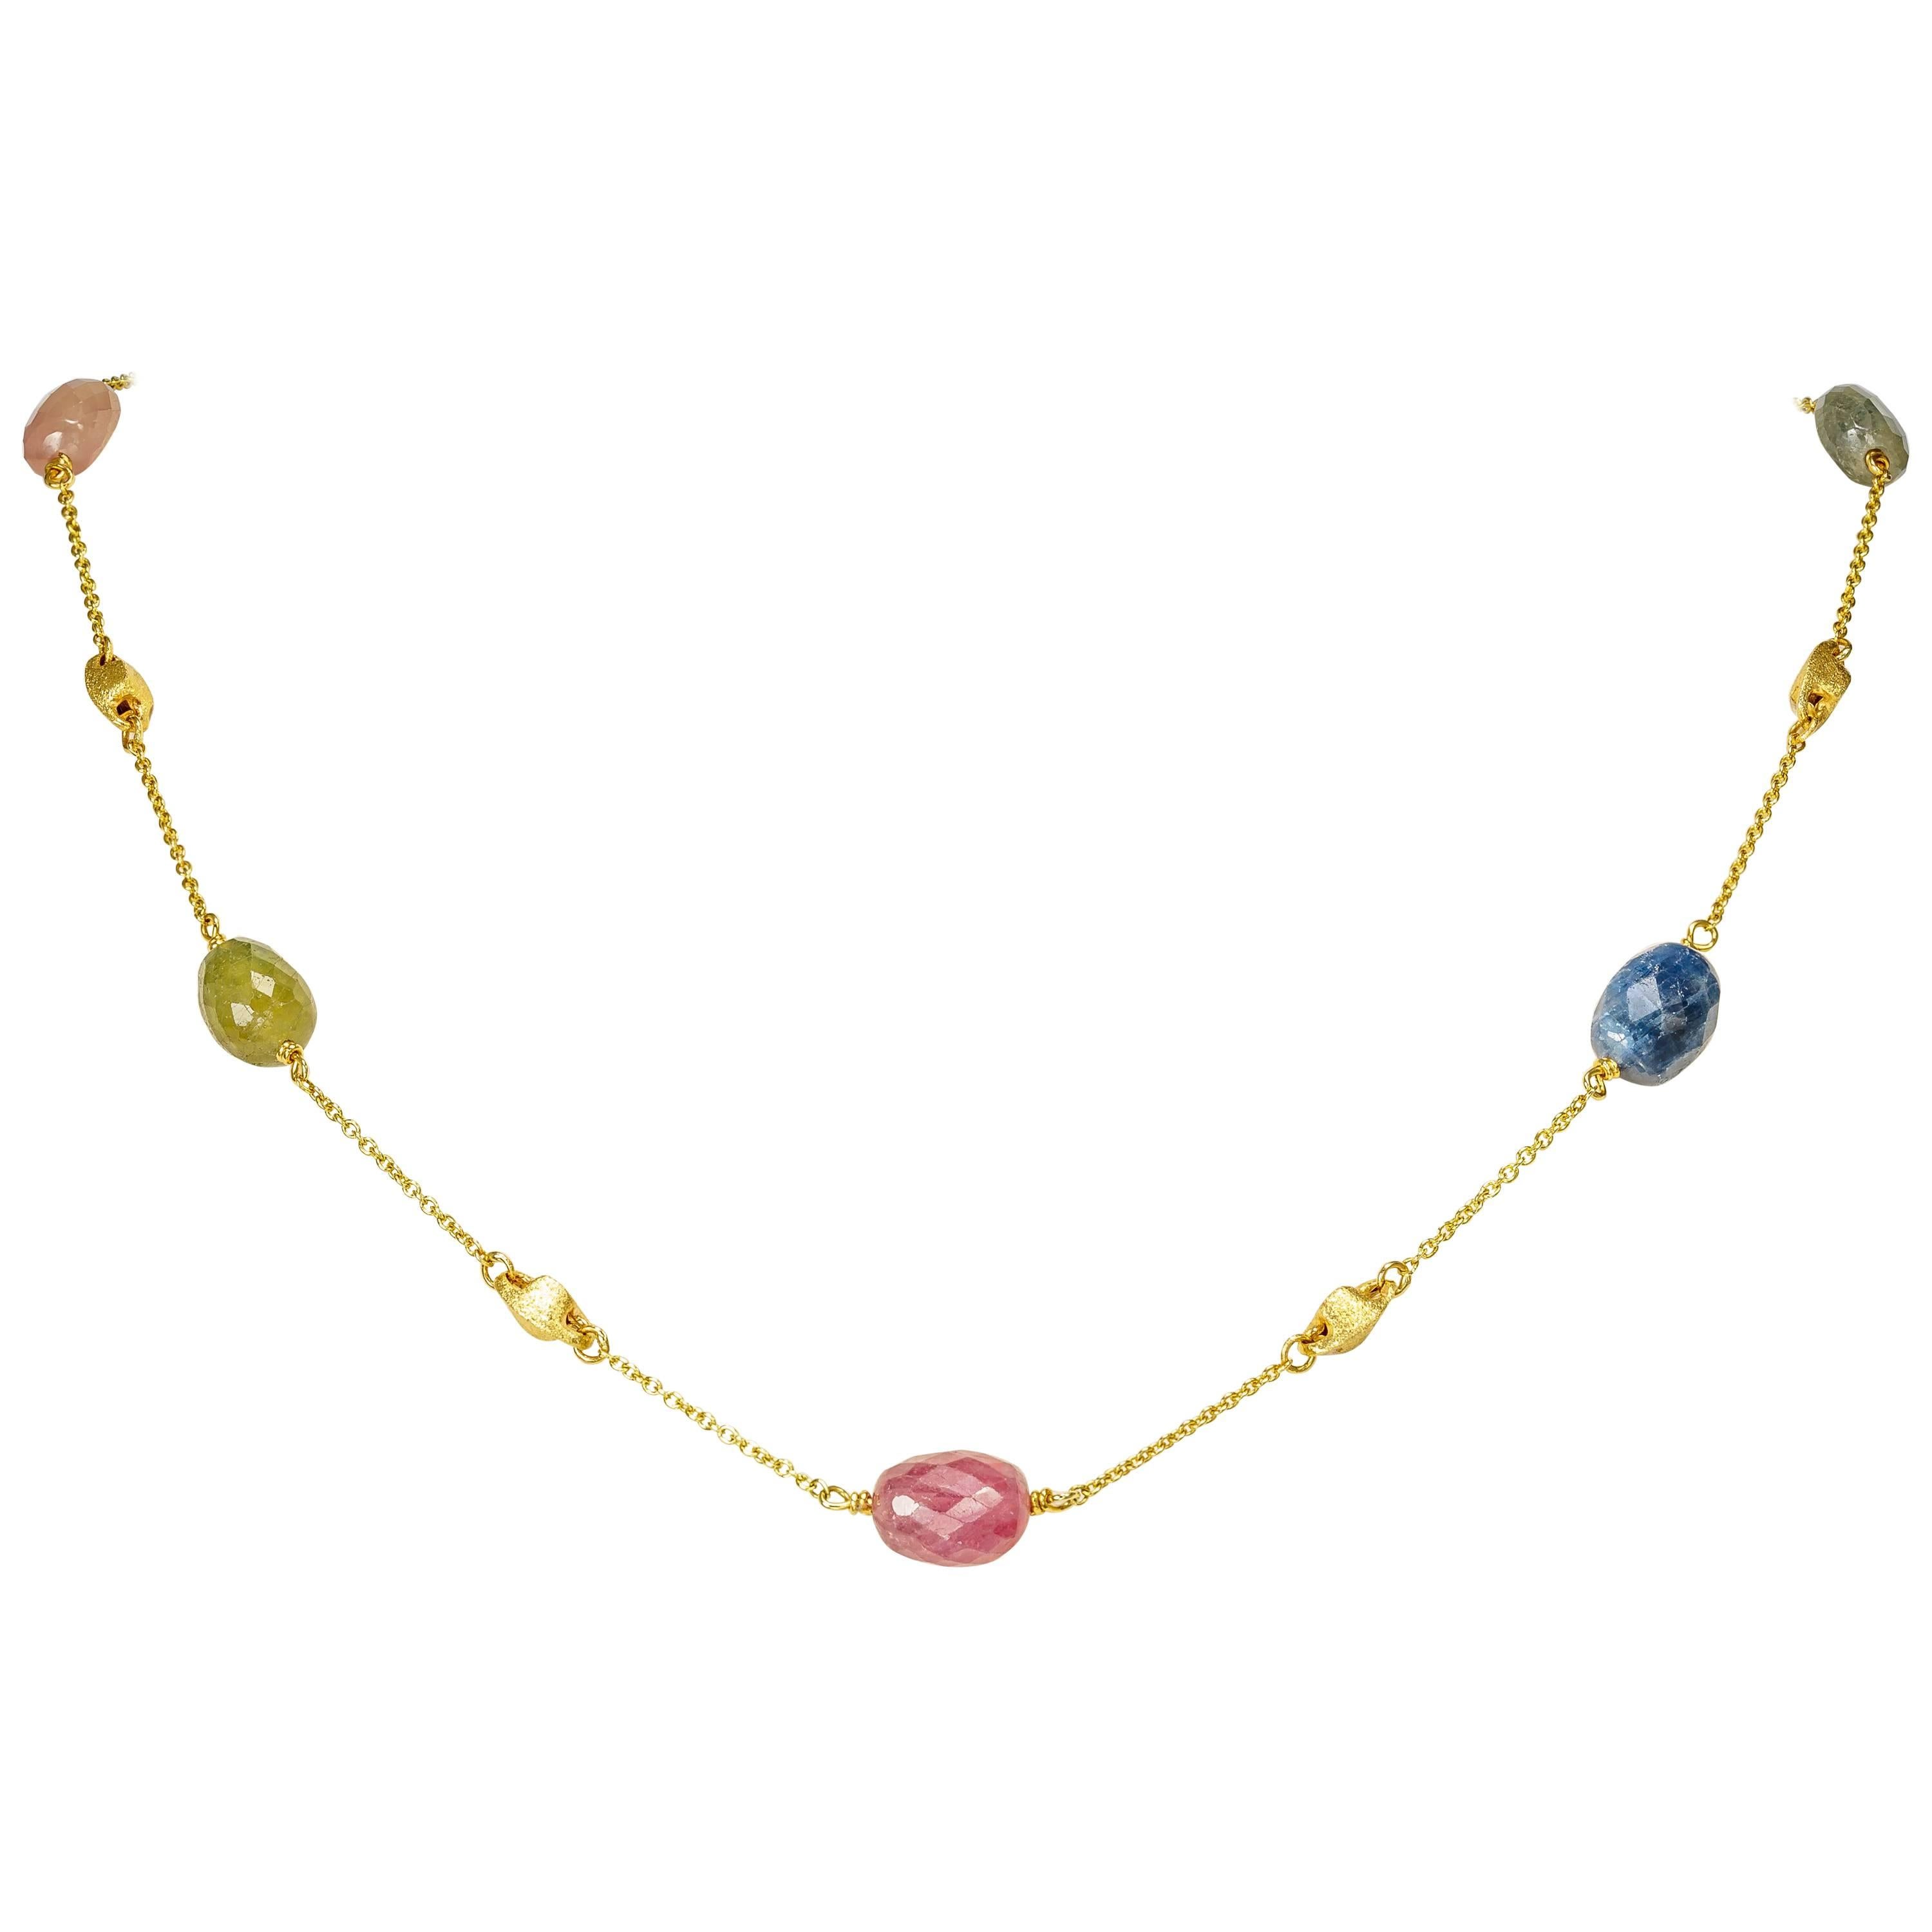 Yvel Beaded Necklace Colored Sapphire Rose Cut 18 Karat Yellow Gold 38.00 Carat For Sale